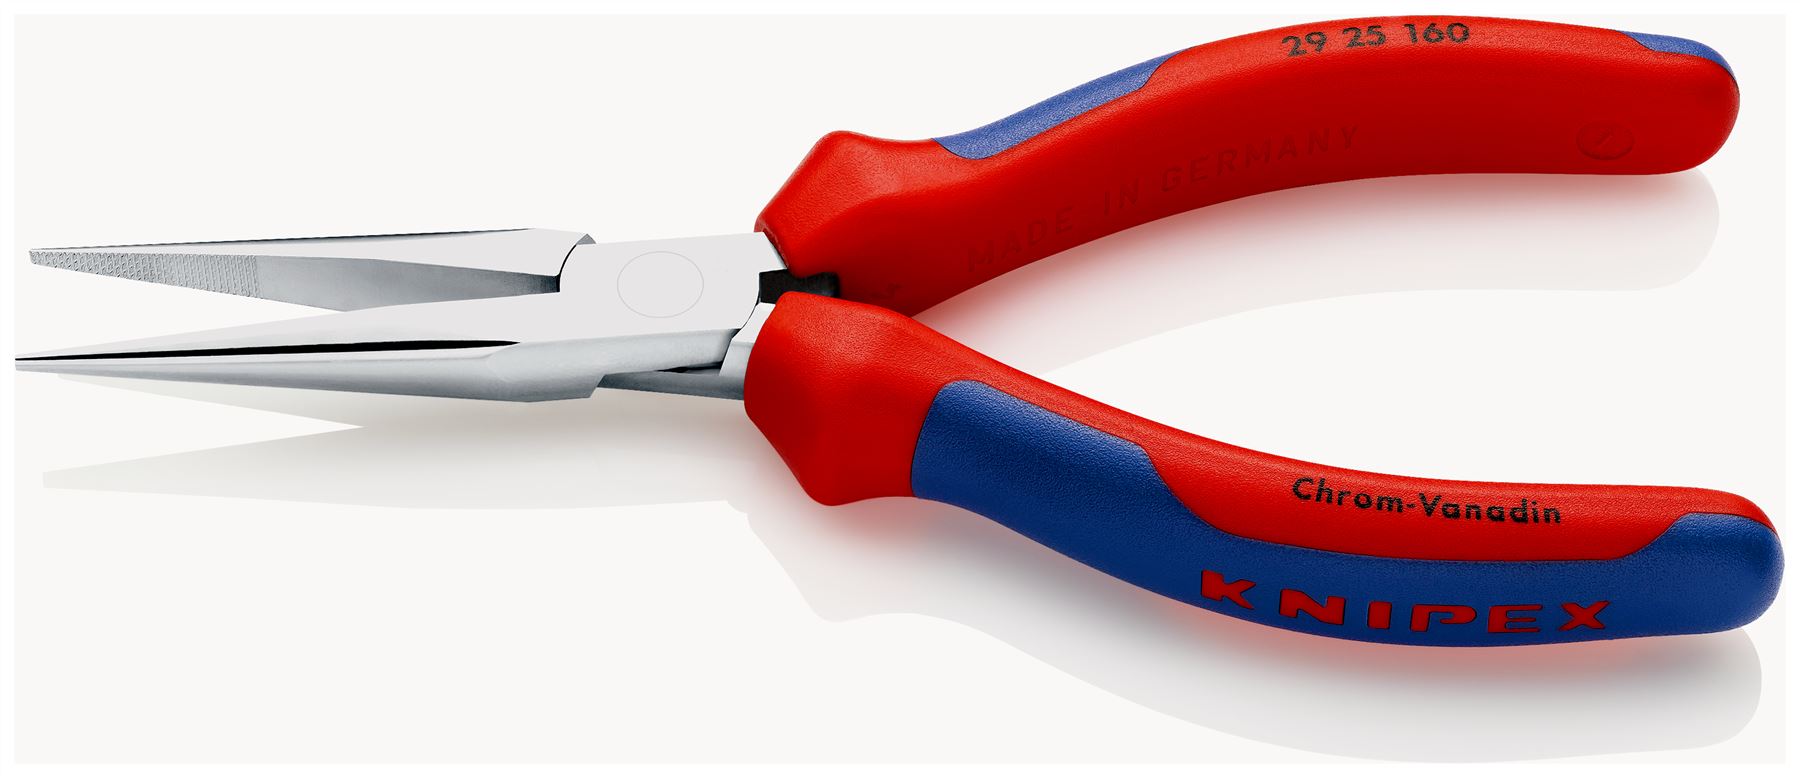 KNIPEX Telephone Pliers Extra Slim Fine Tips 160mm Multi Component Grips 29 25 160